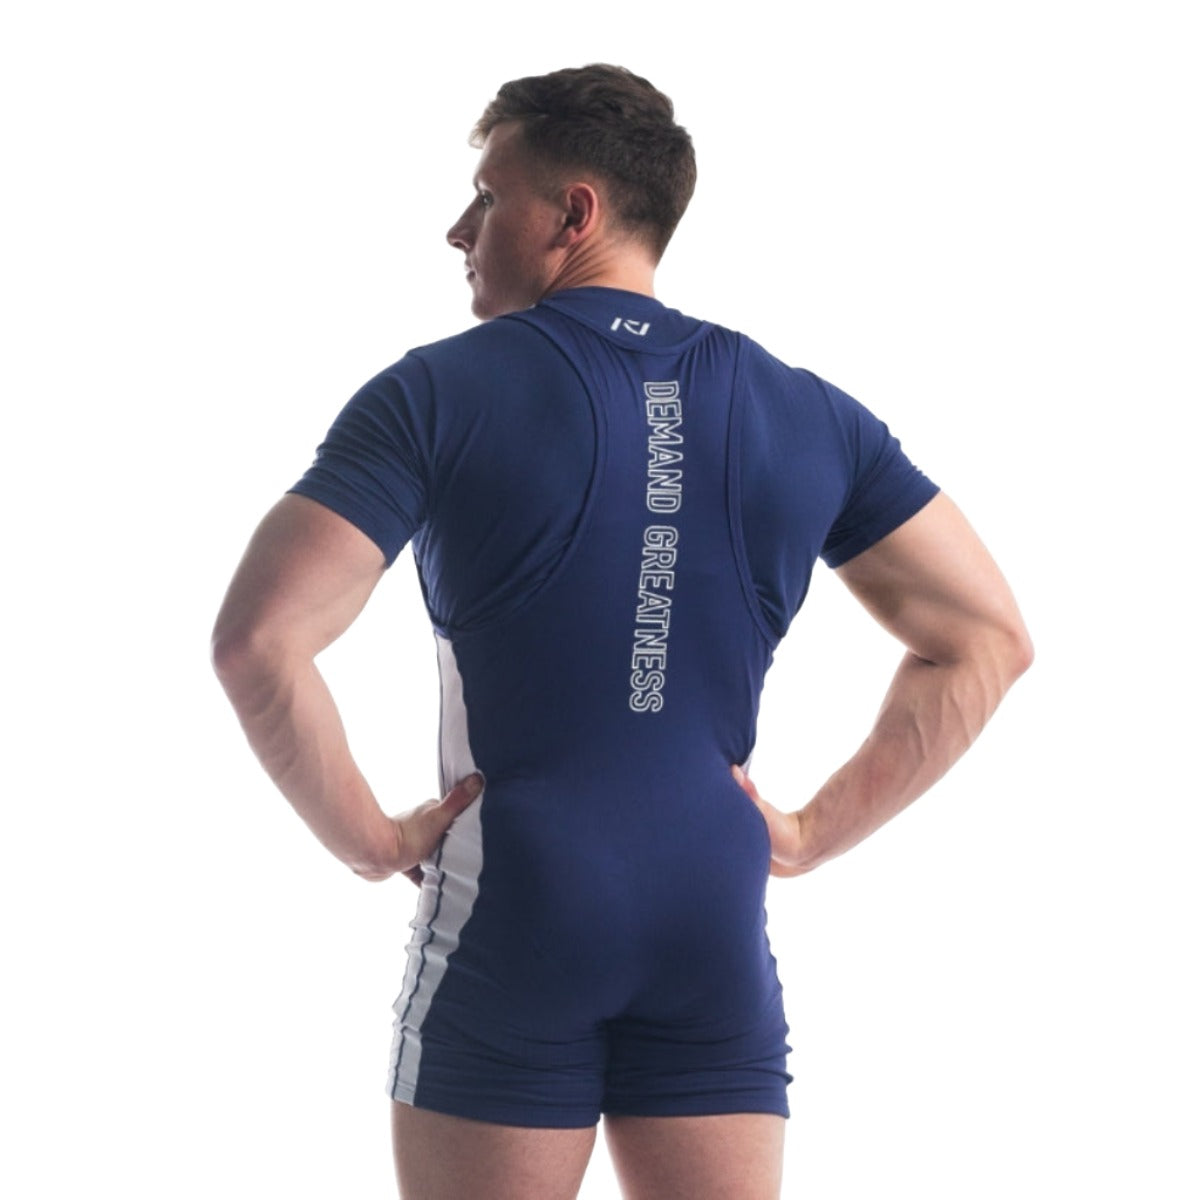 A7 Luno Men's Soft Suit - IPF Approved (Night Light)